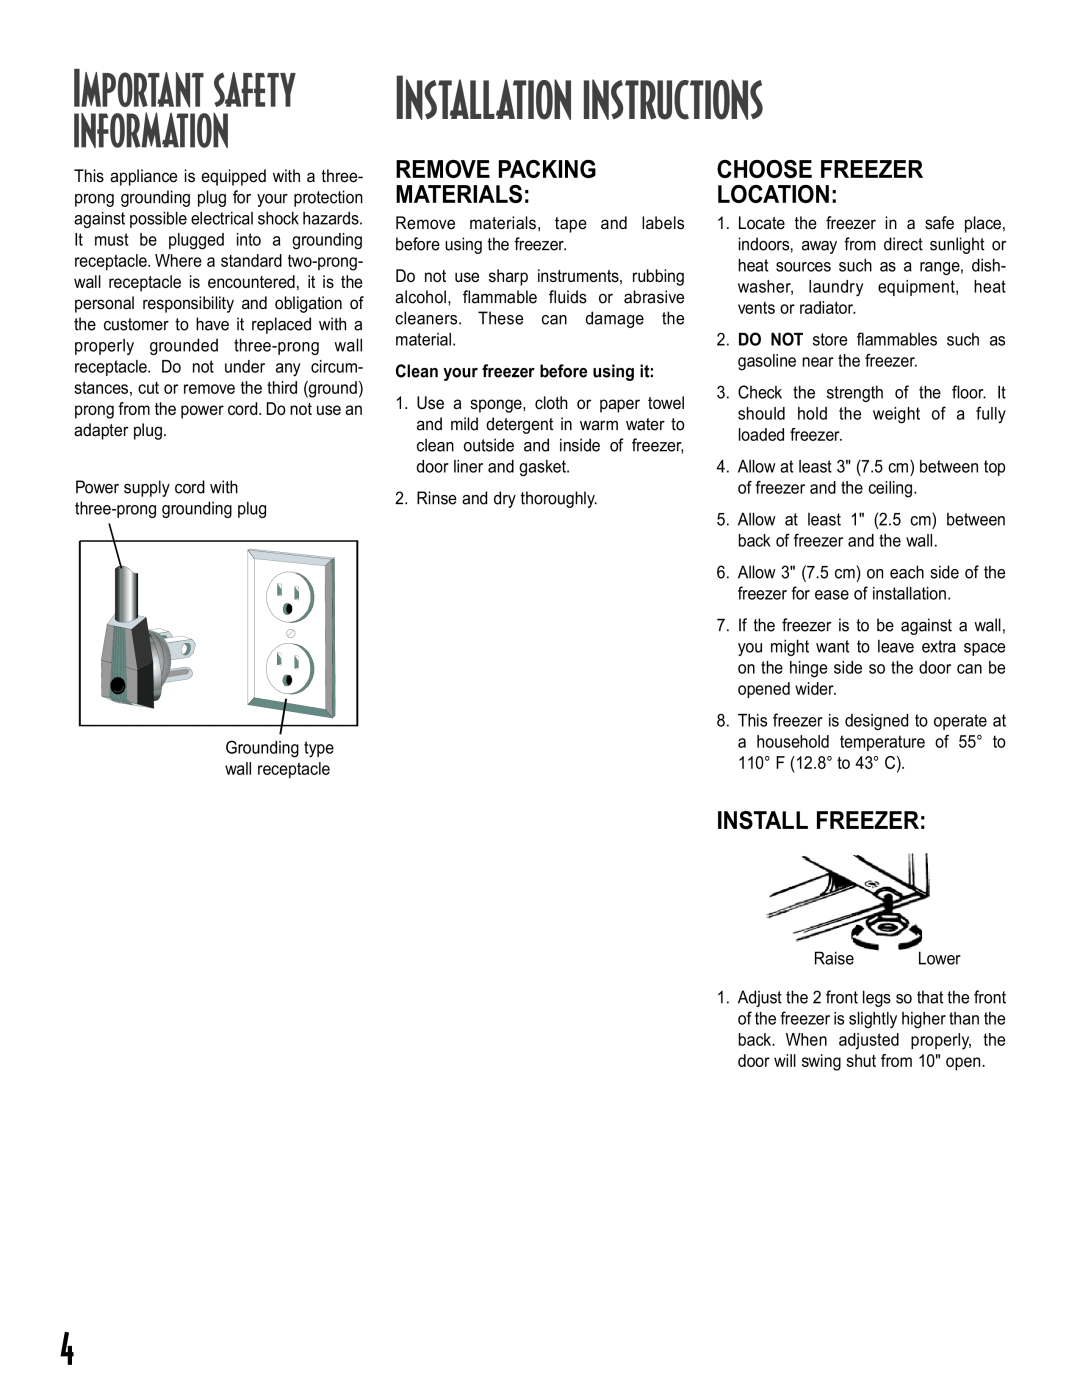 Maytag Upright Freezers Installation instructions, Important safety information, Remove Packing Materials, Install Freezer 